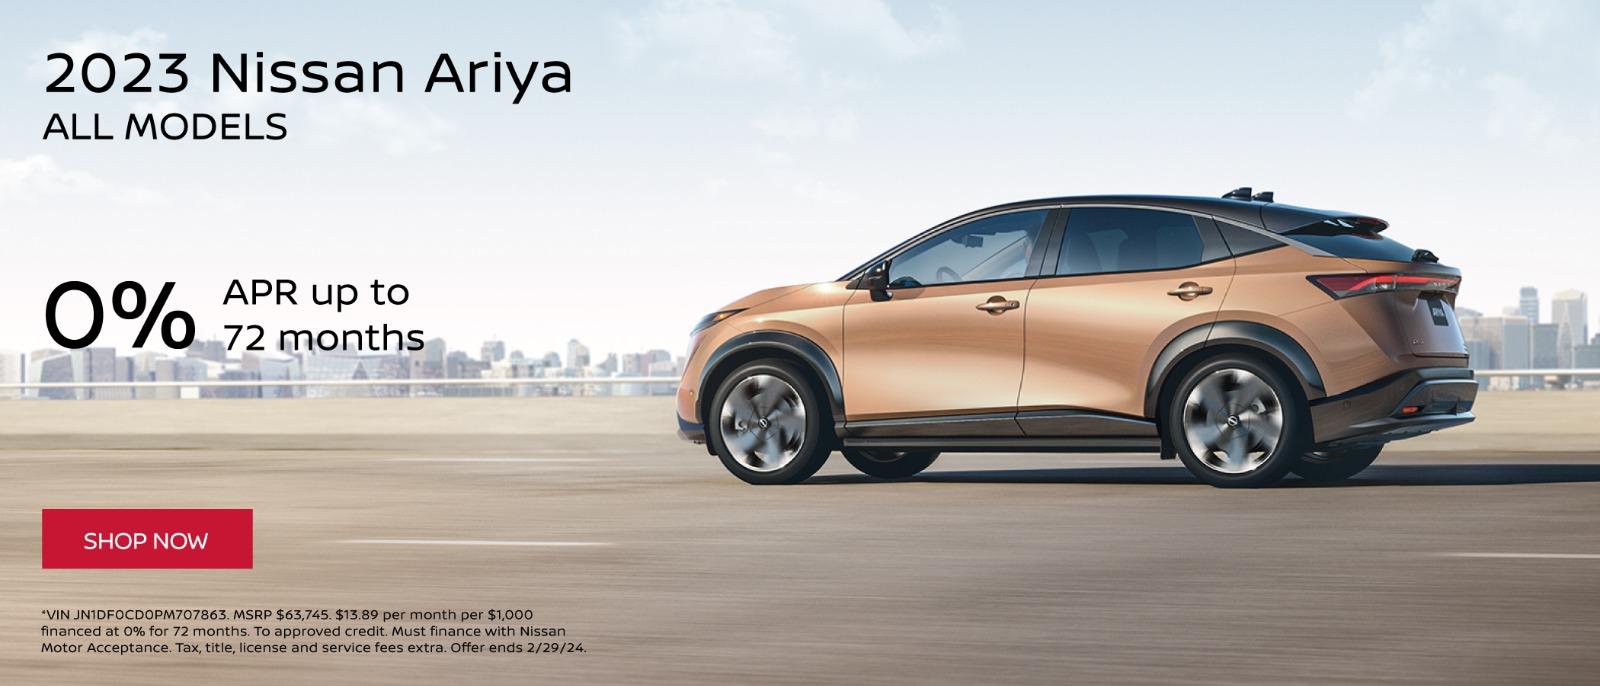 All New 2023 Nissan Ariya 0% Apr up to 72 months